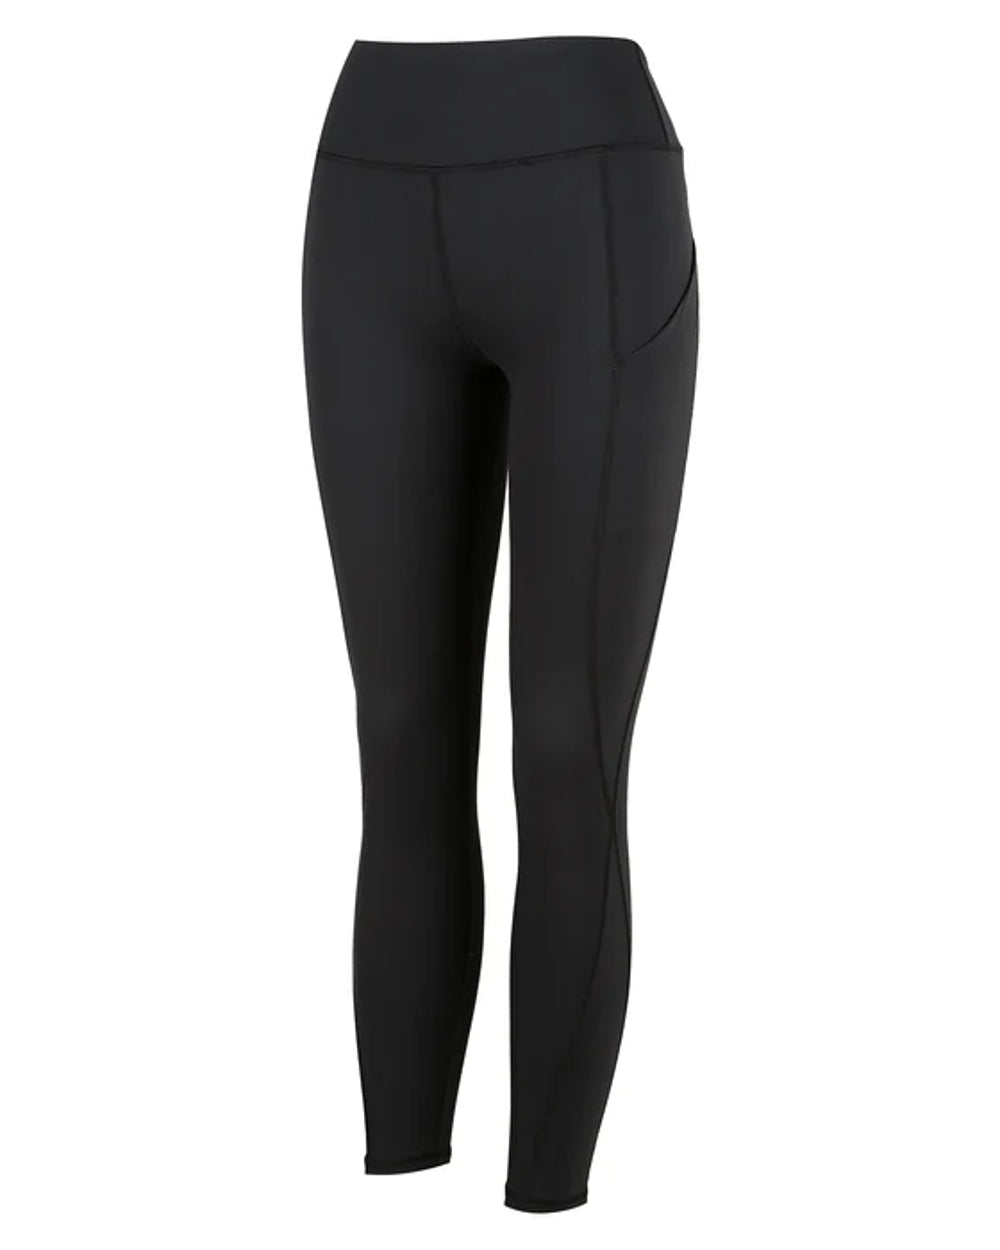 Womens Leggings and Tights - Perfect for Walking or Riding